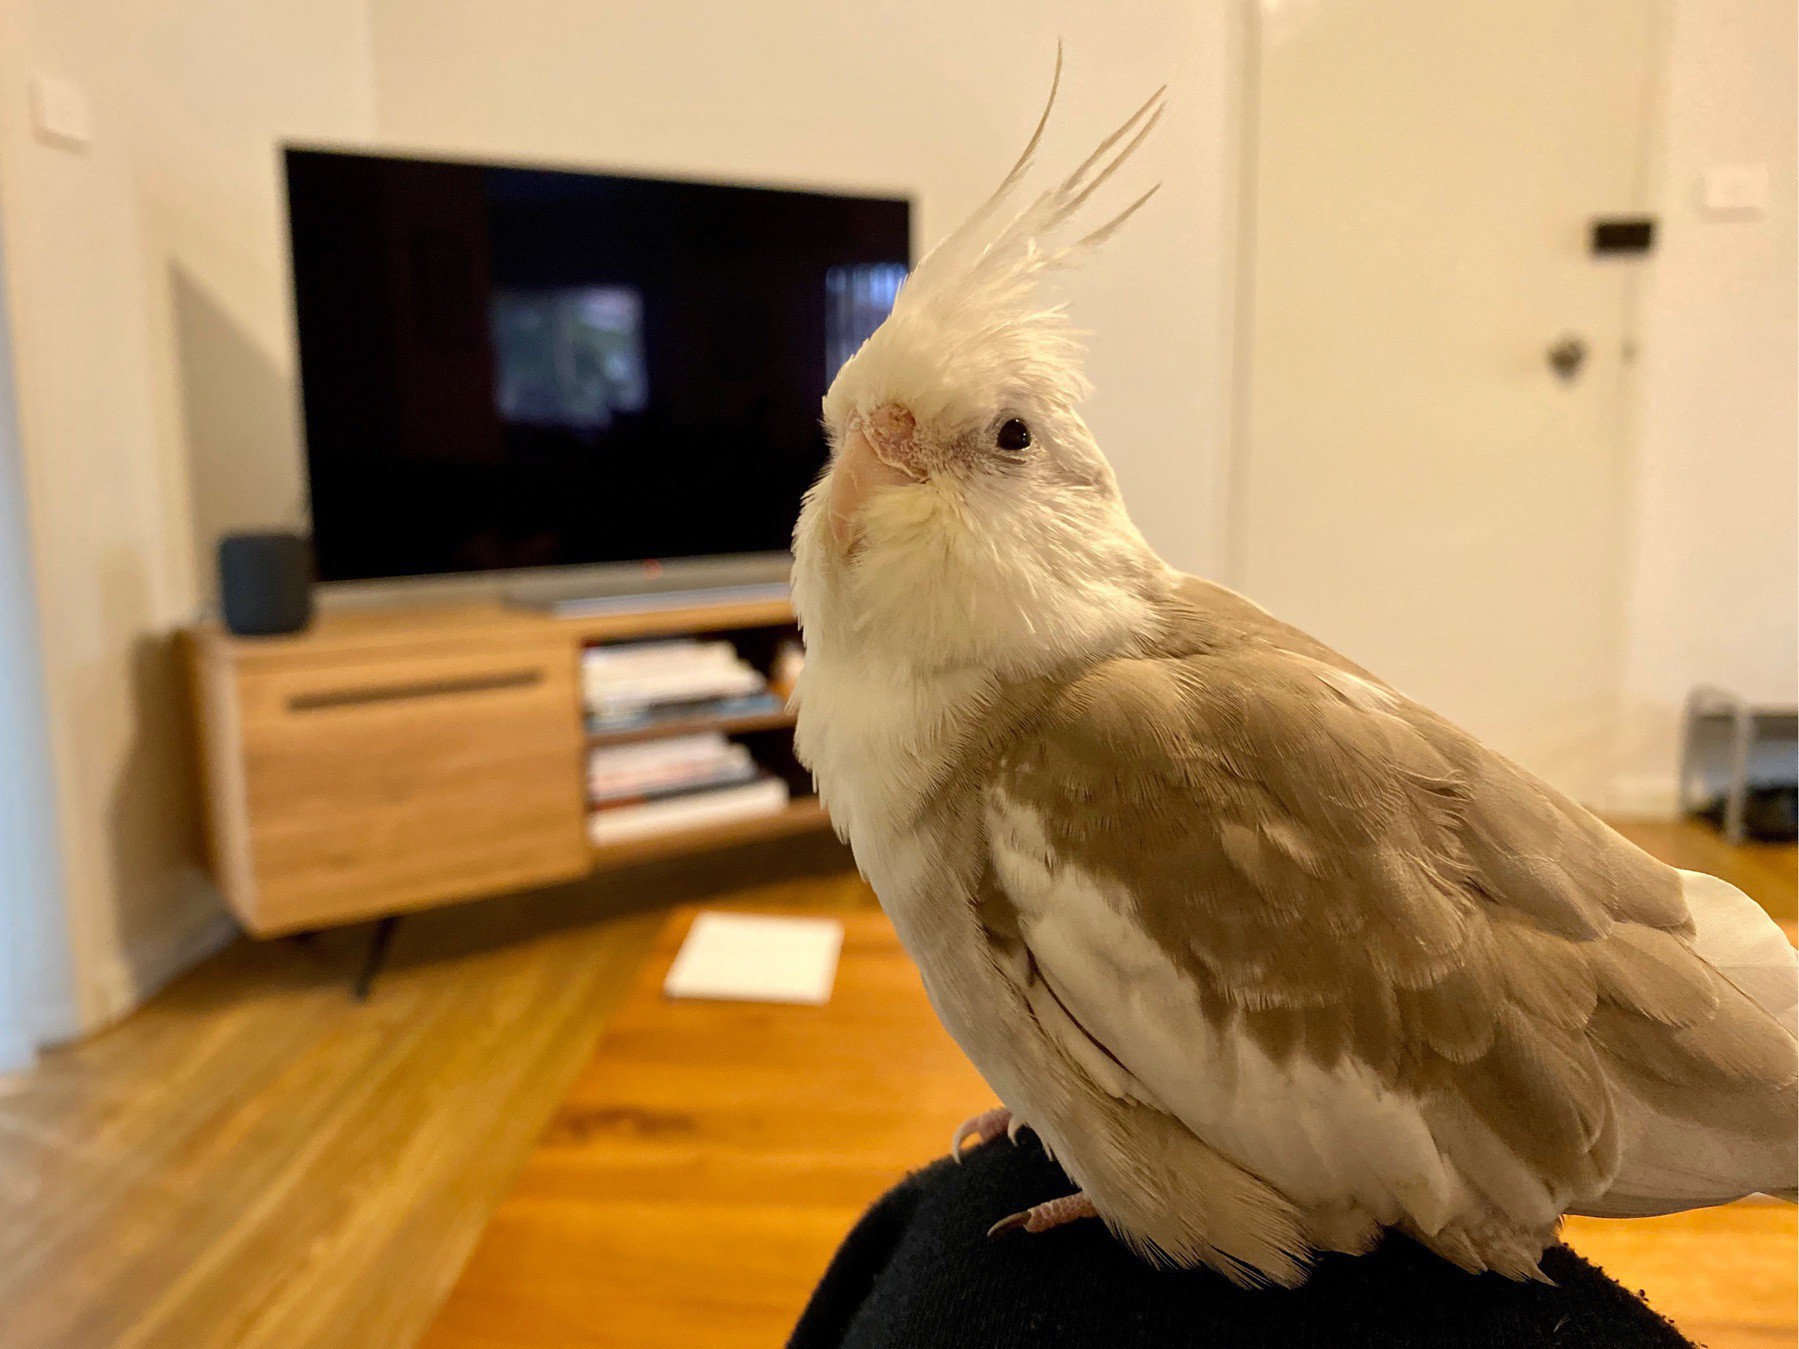 Rocky the cockatiel sitting on my knee in the lounge room, with the TV in the background